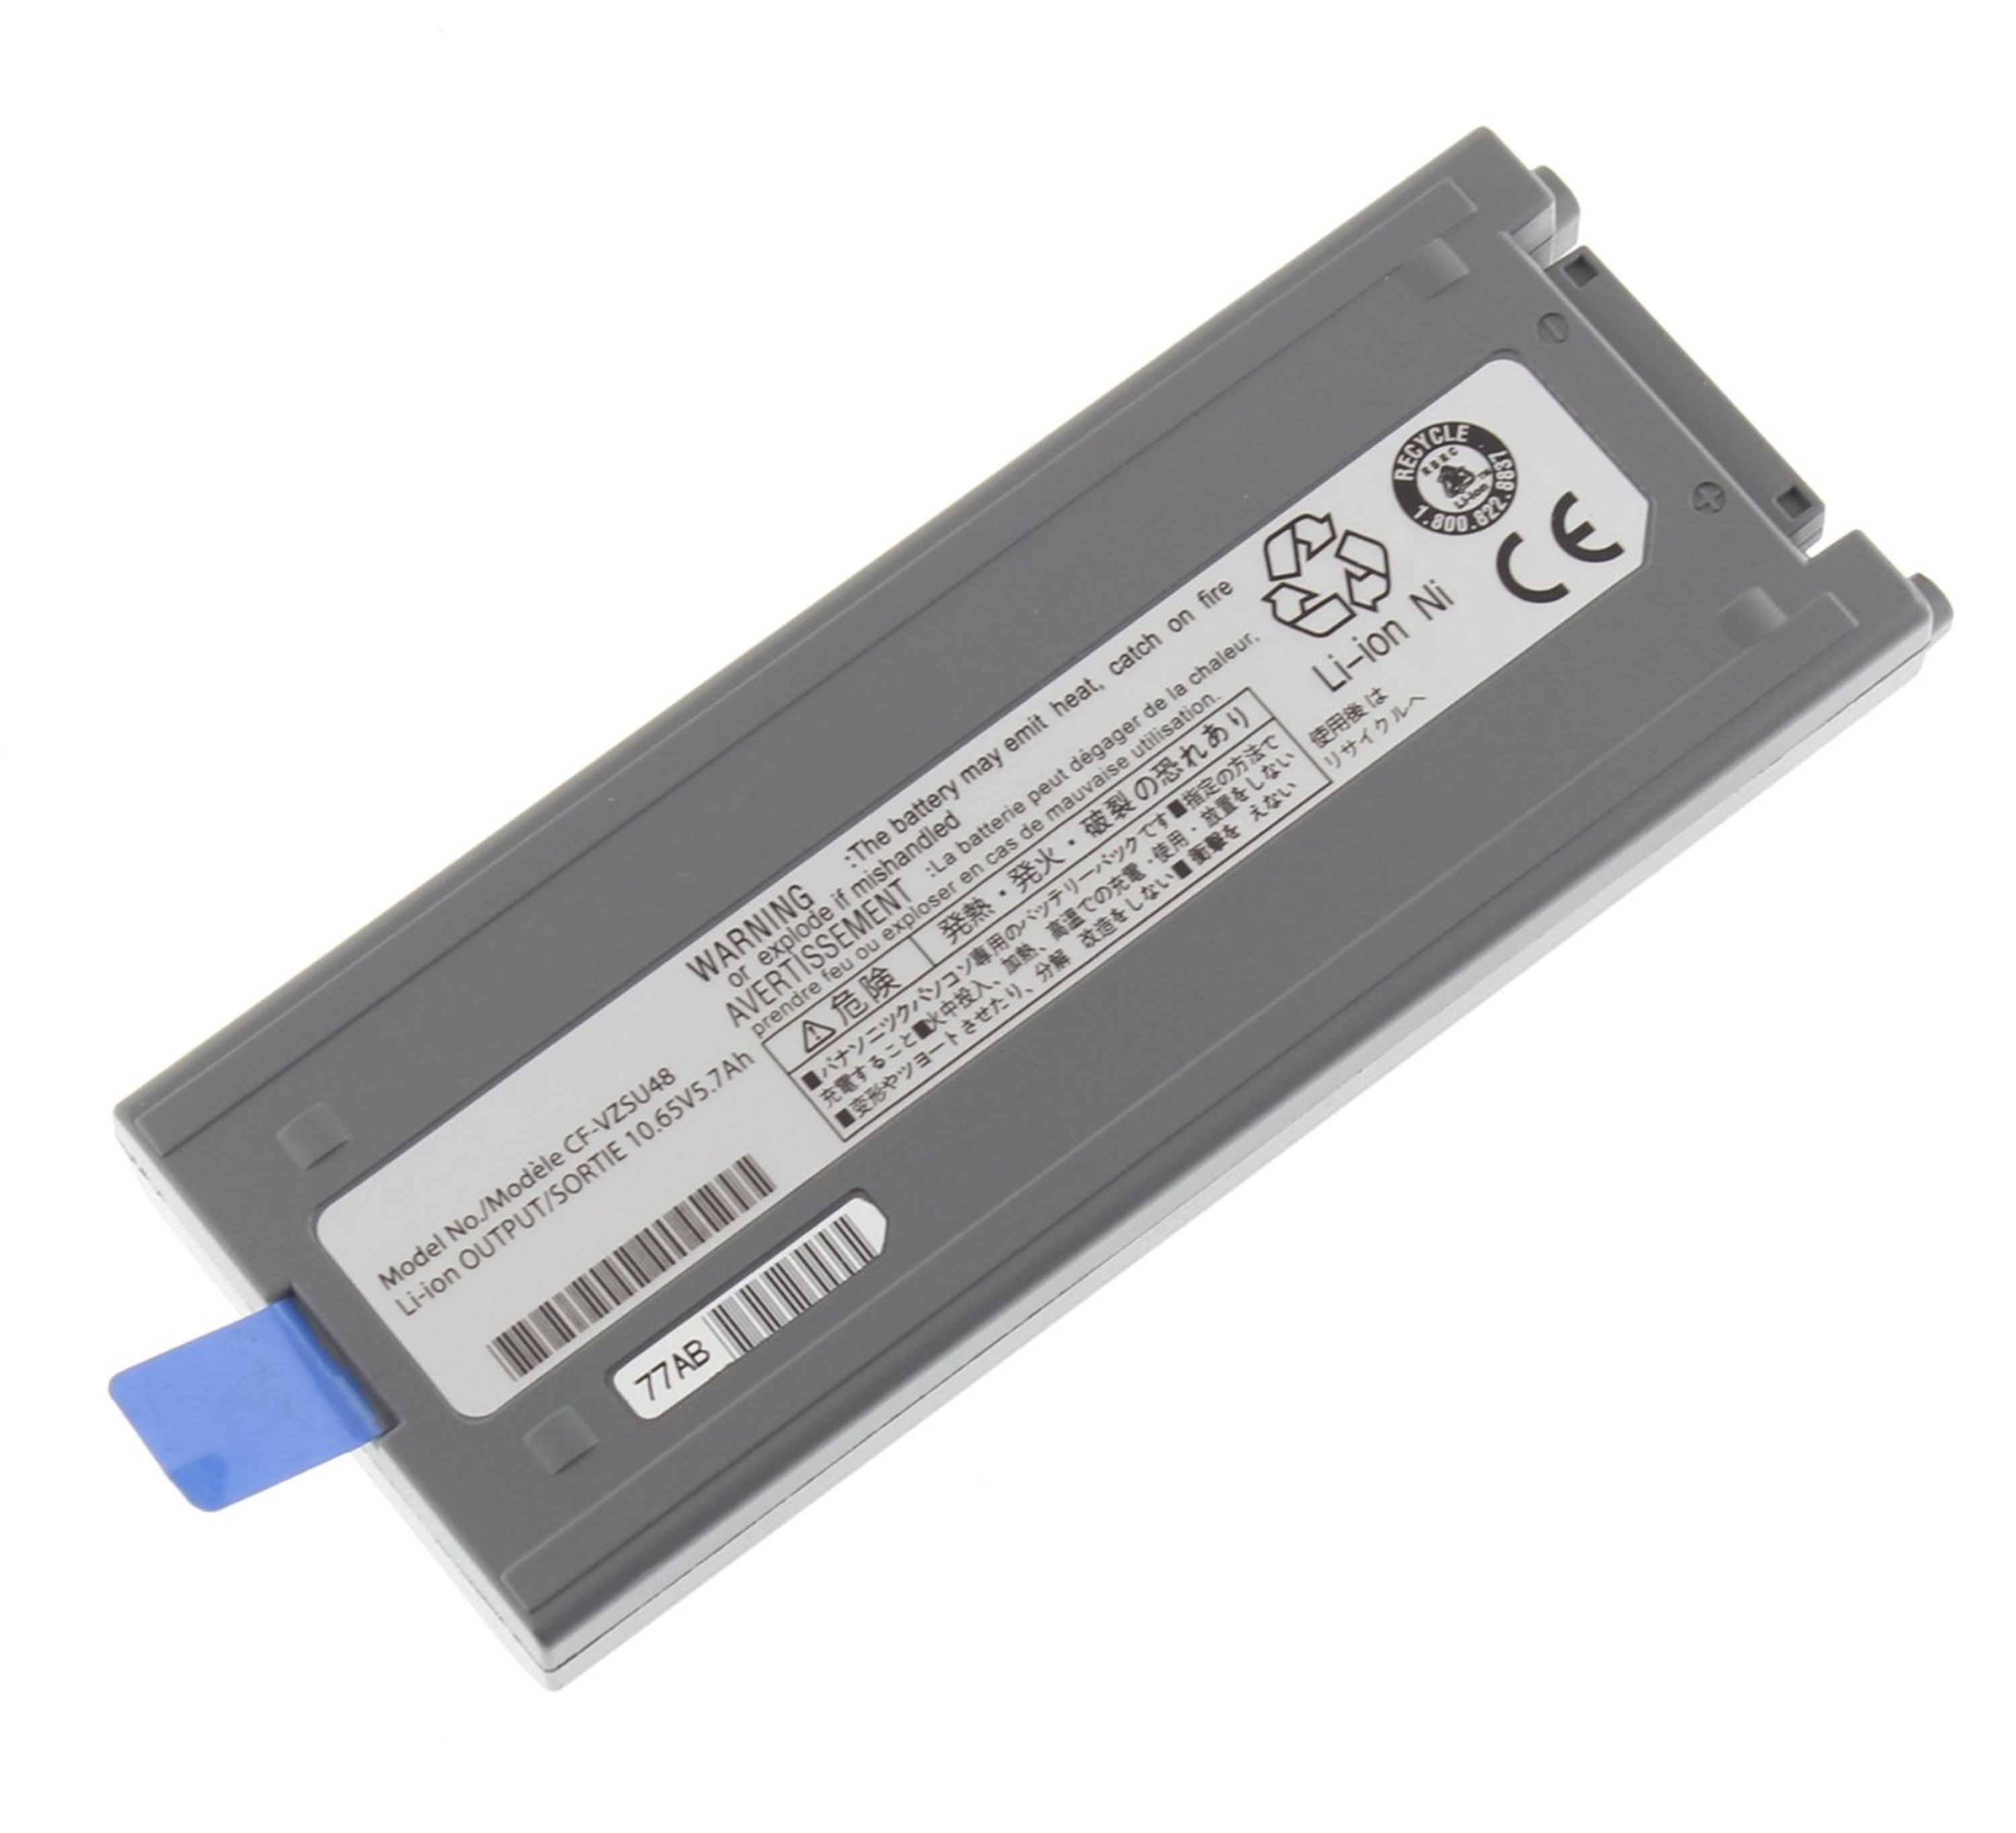 CF-VZSU48 rechargeable lithium ion Notebook battery Laptop battery 10.65V 5700mAh